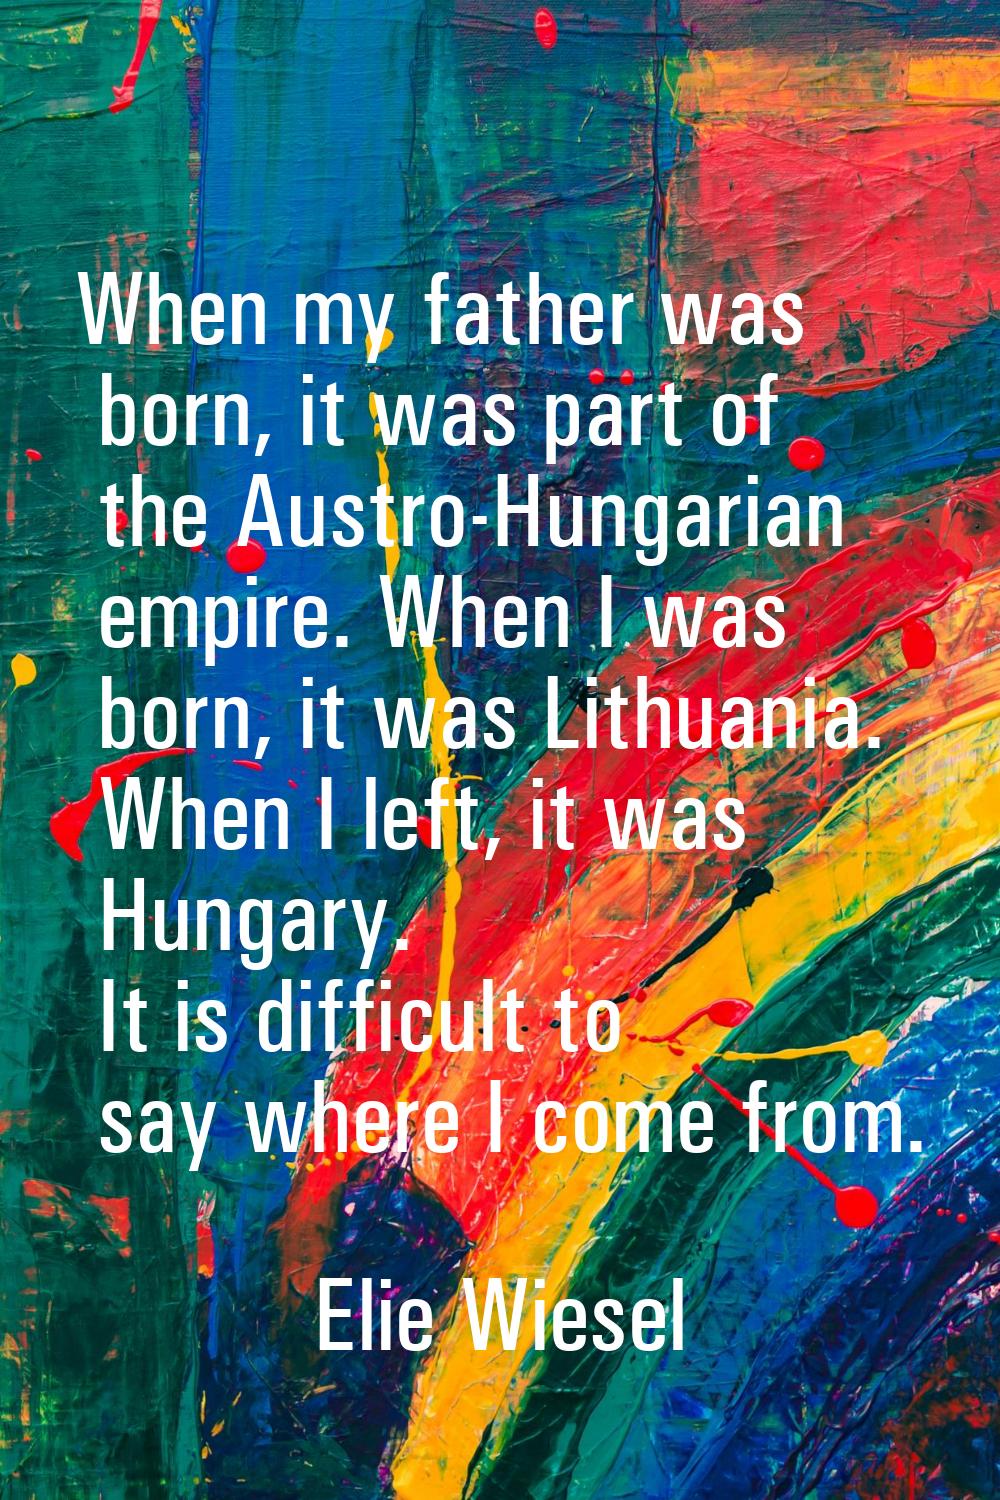 When my father was born, it was part of the Austro-Hungarian empire. When I was born, it was Lithua